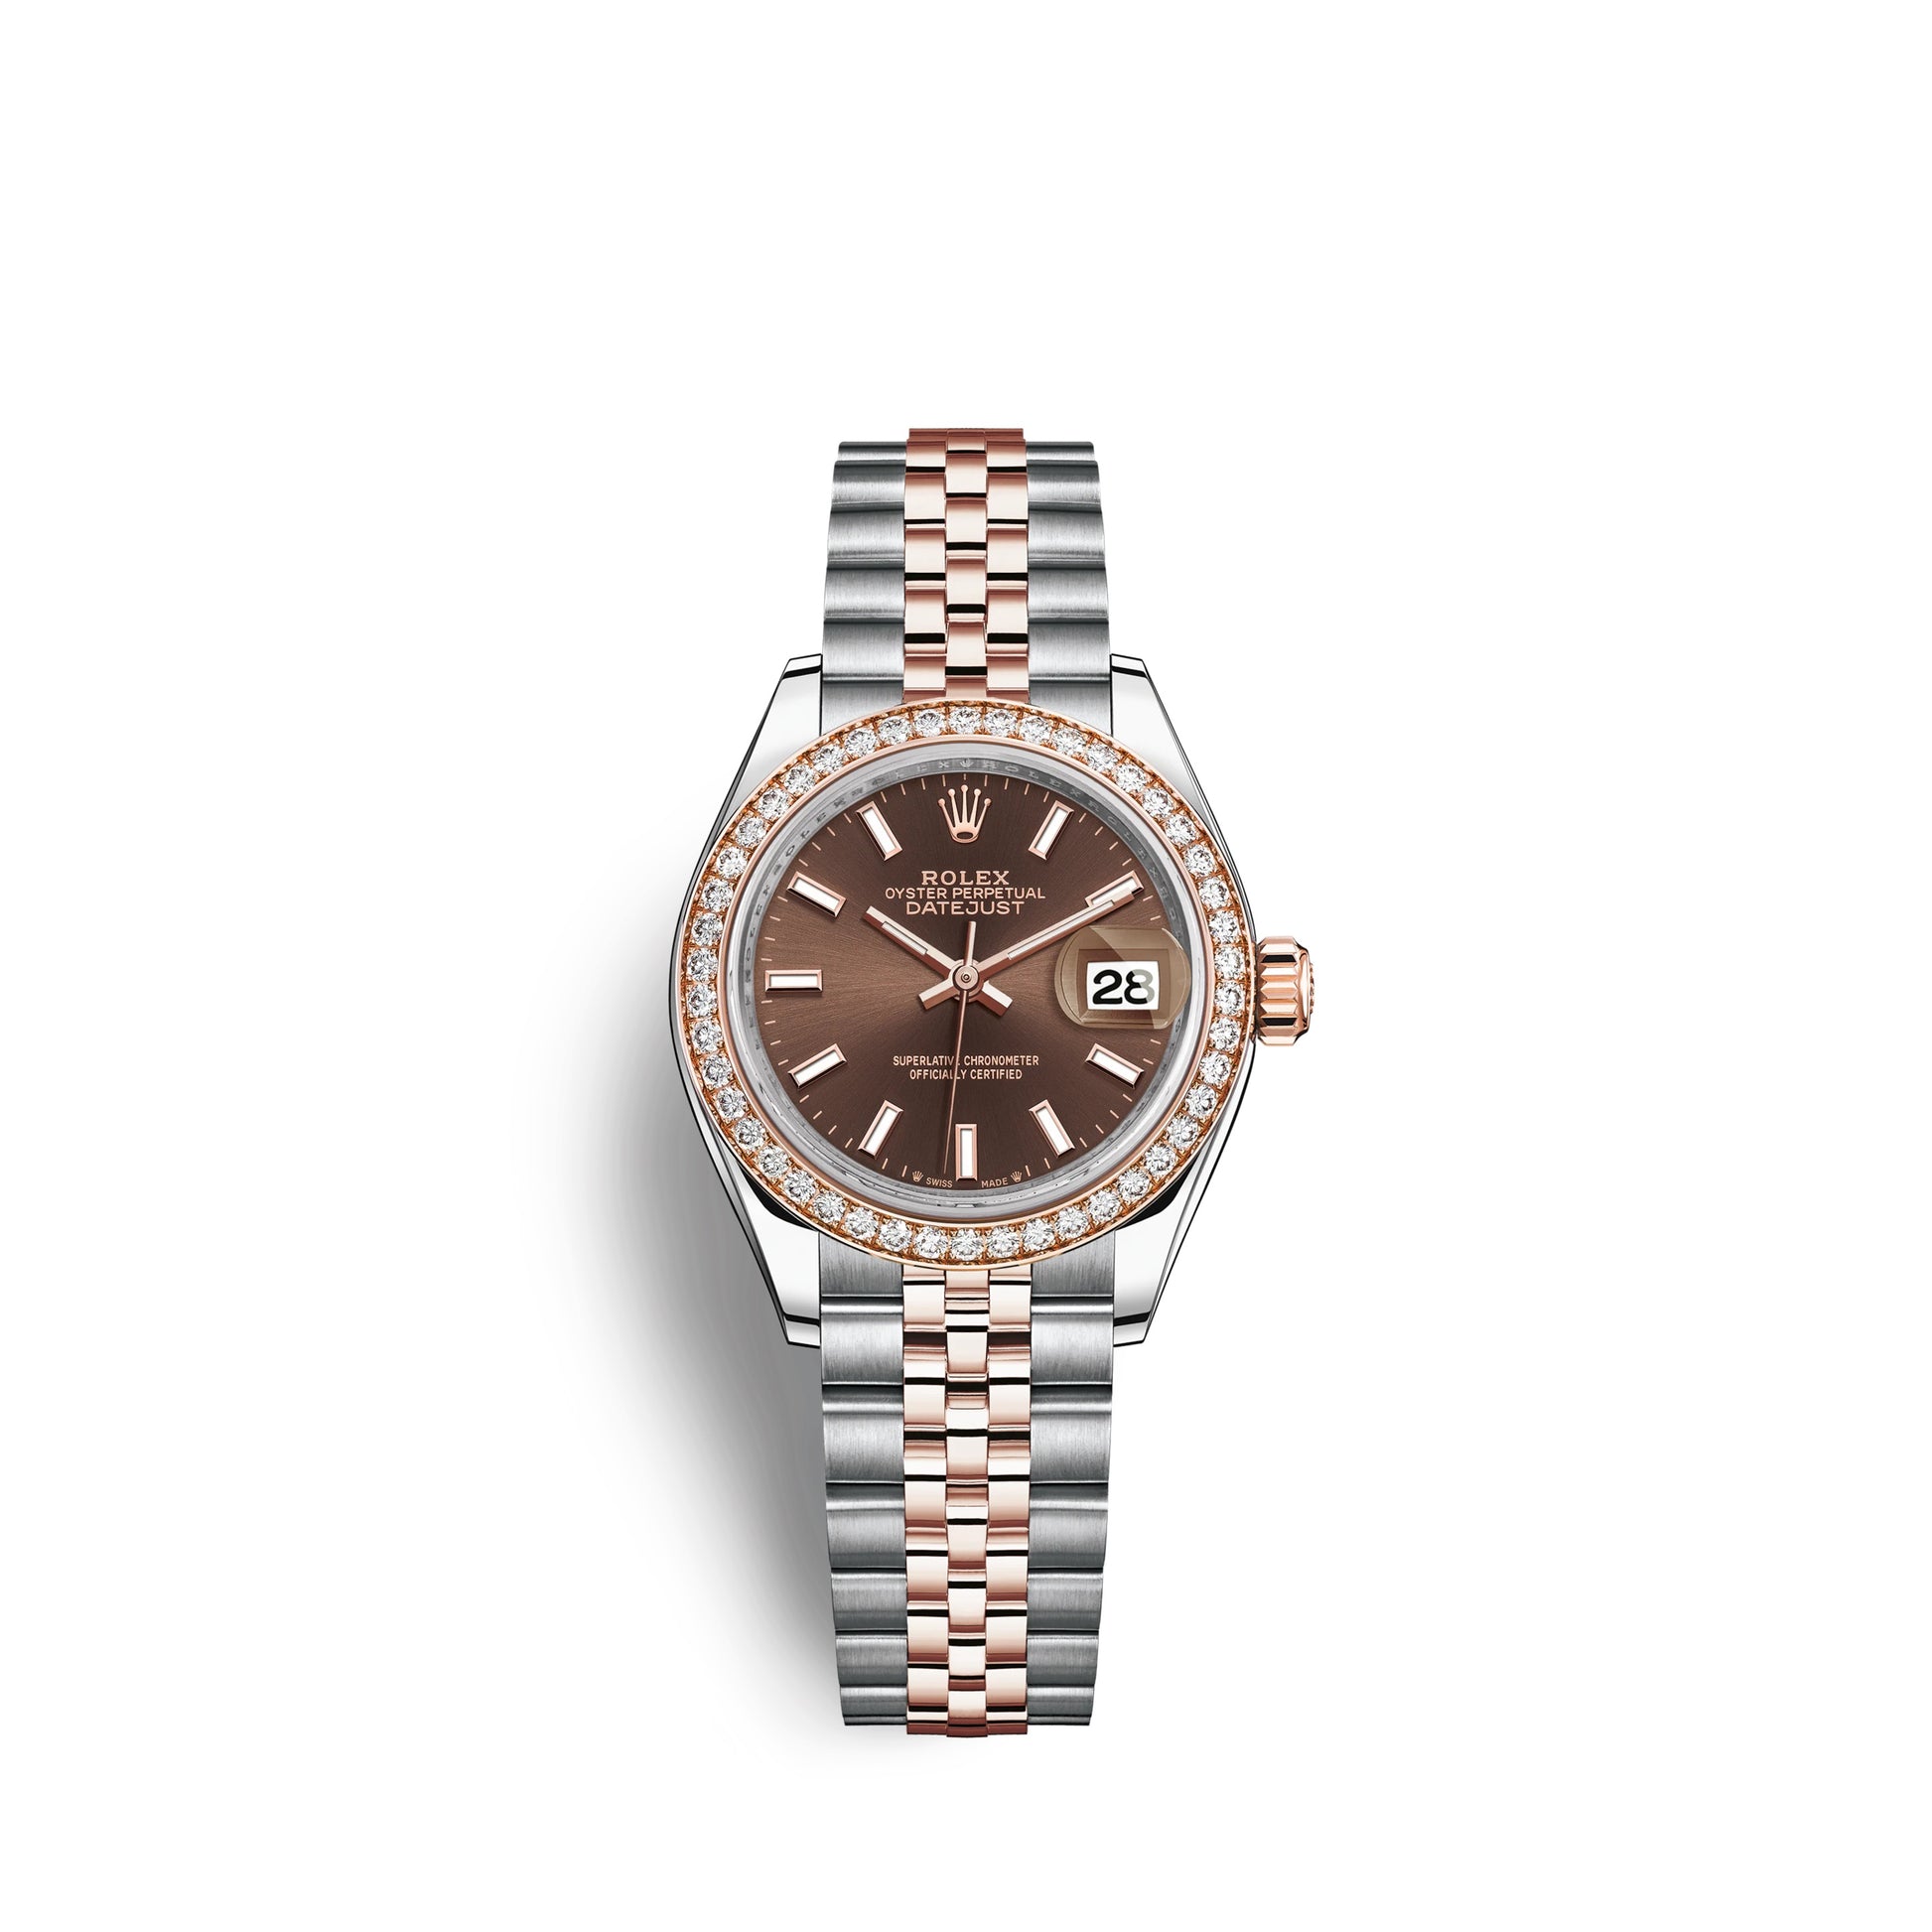 Rolex Lady-Datejust 28, Oystersteel and 18k Everose Gold, Ref# 279381RBR-0017